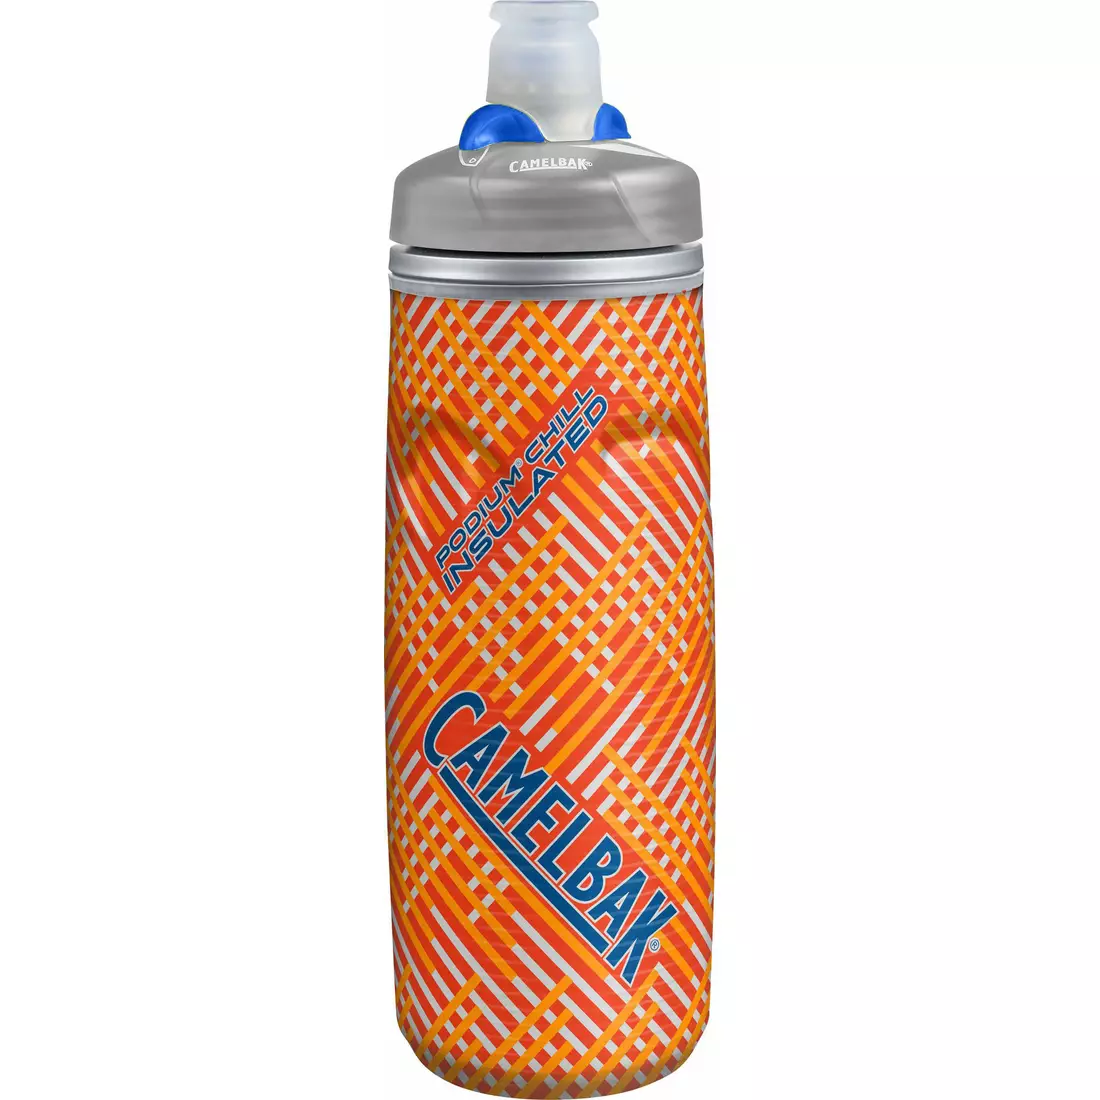 Camelbak SS18 Podium Chill Thermal Cycling Water Bottle 21oz/620ml Poppy